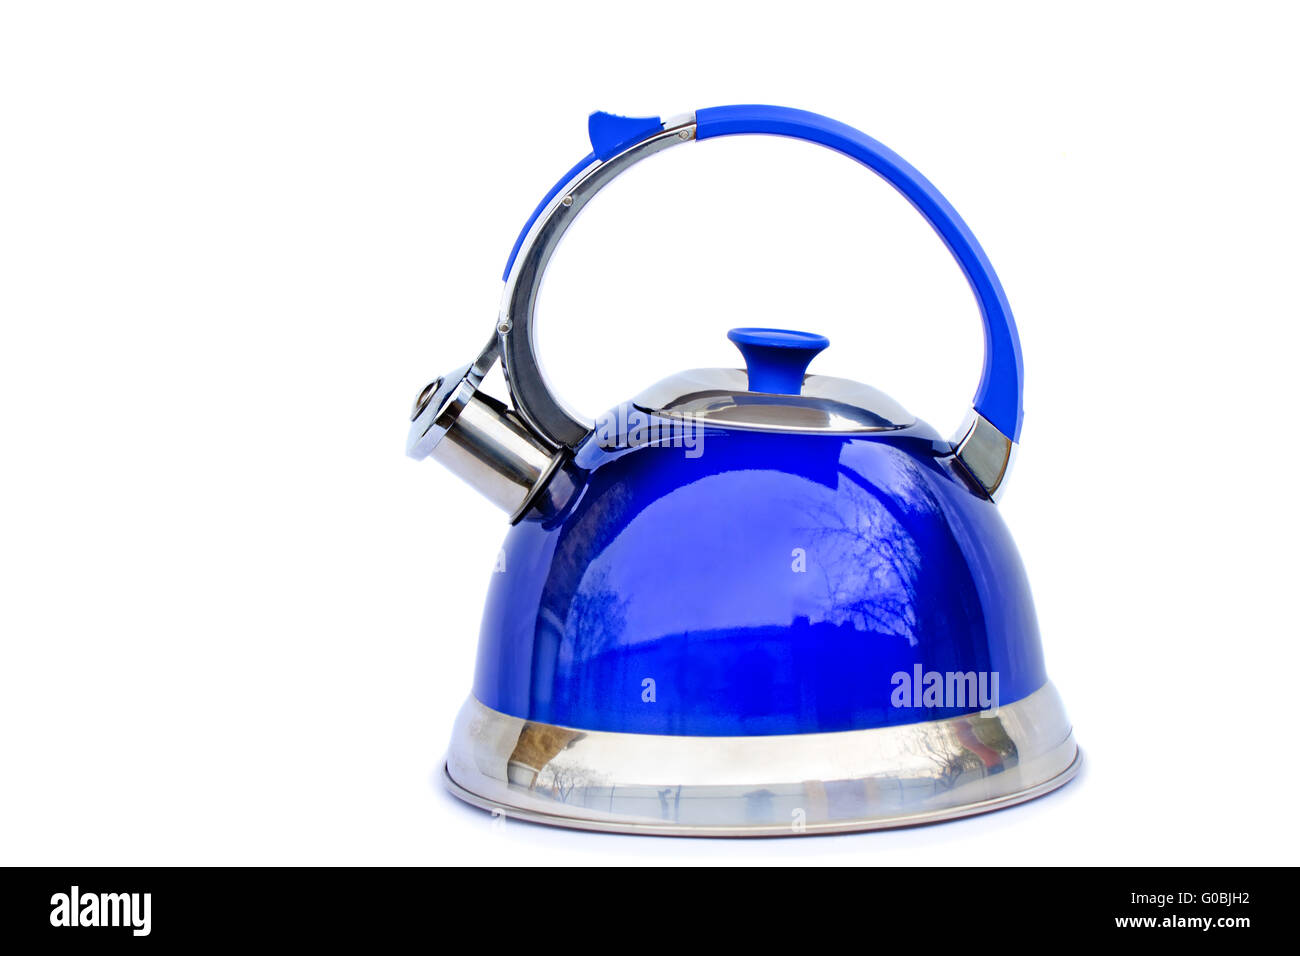 Bright blue kettle on a white background. Stock Photo